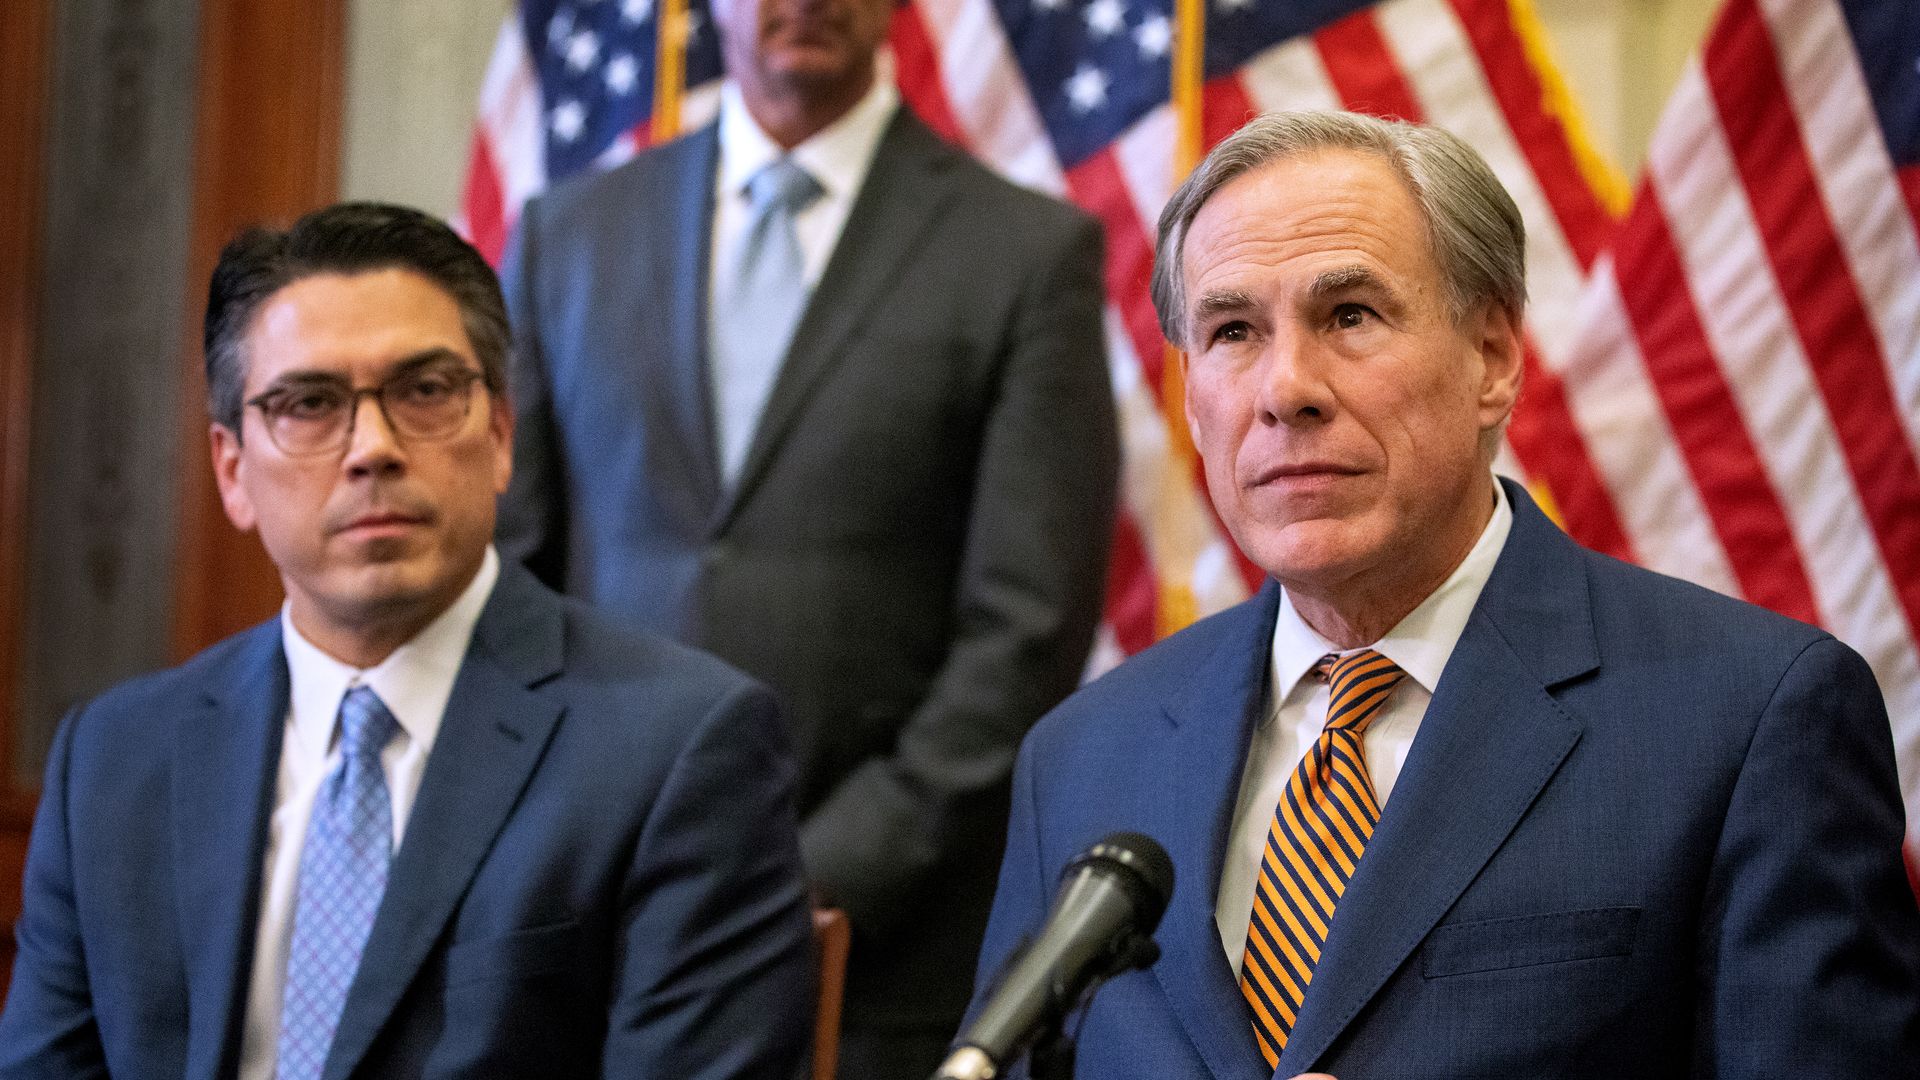 Photo of Greg Abbott and Chris Paddie sitting at a table with the American flag behind them